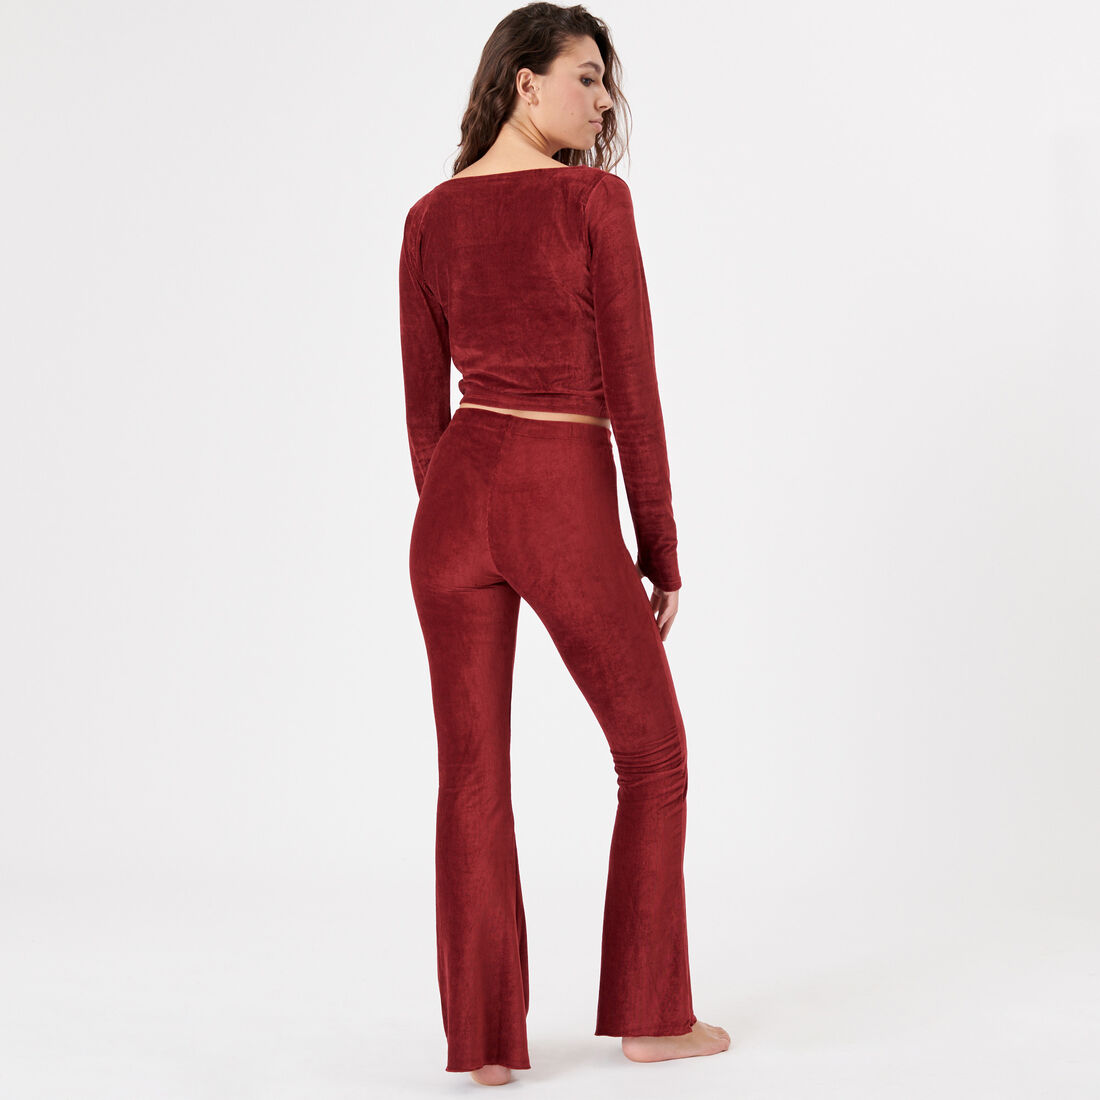 flared cord trousers with hooks - burgundy;